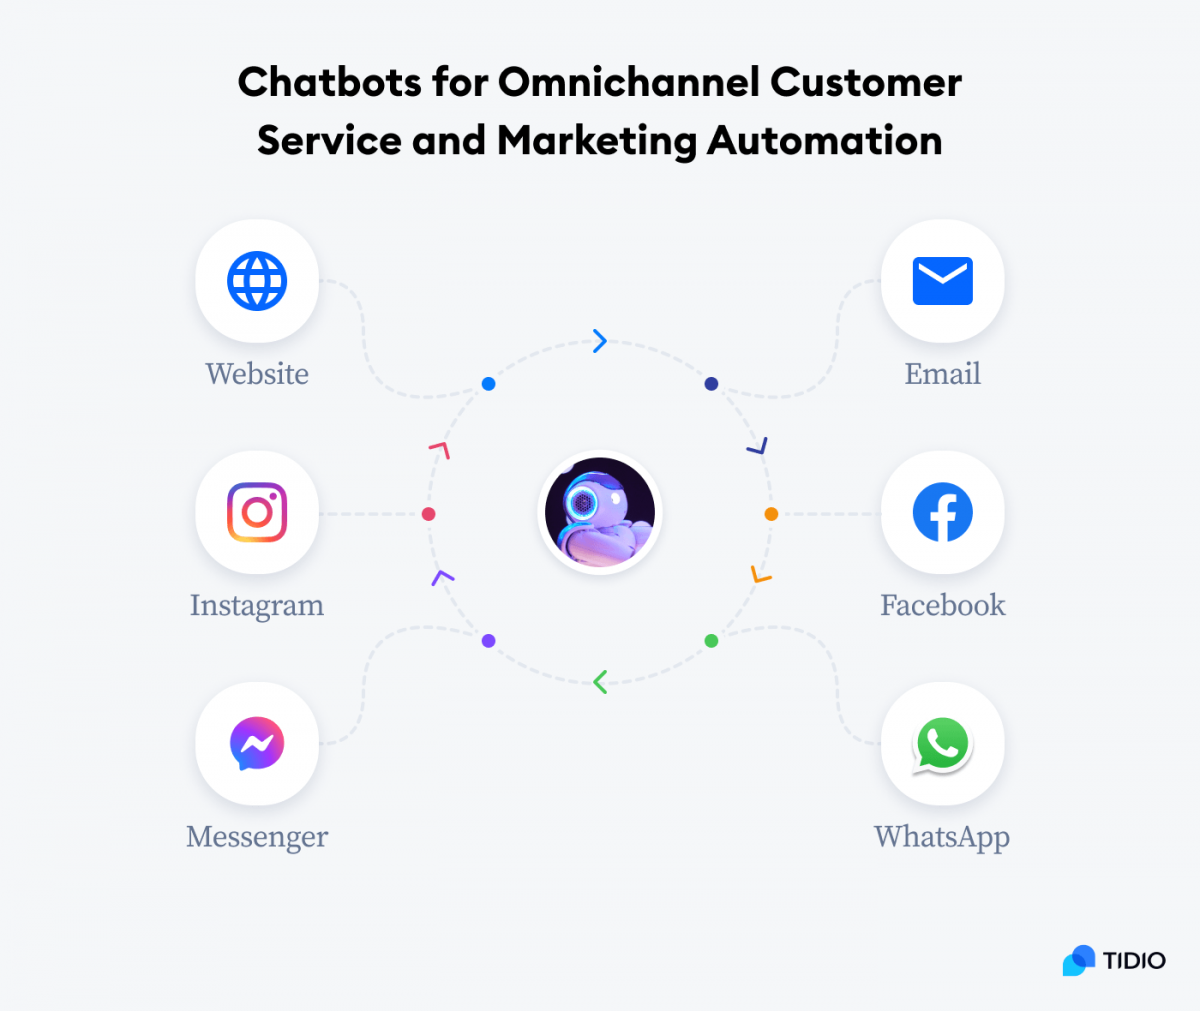 Infographic presenting channels that can be connected with chatbots for Omnichannel Customer Service and Marketing Automation: Website, Instagram, Messenger, Email, Facebook, WhatsApp